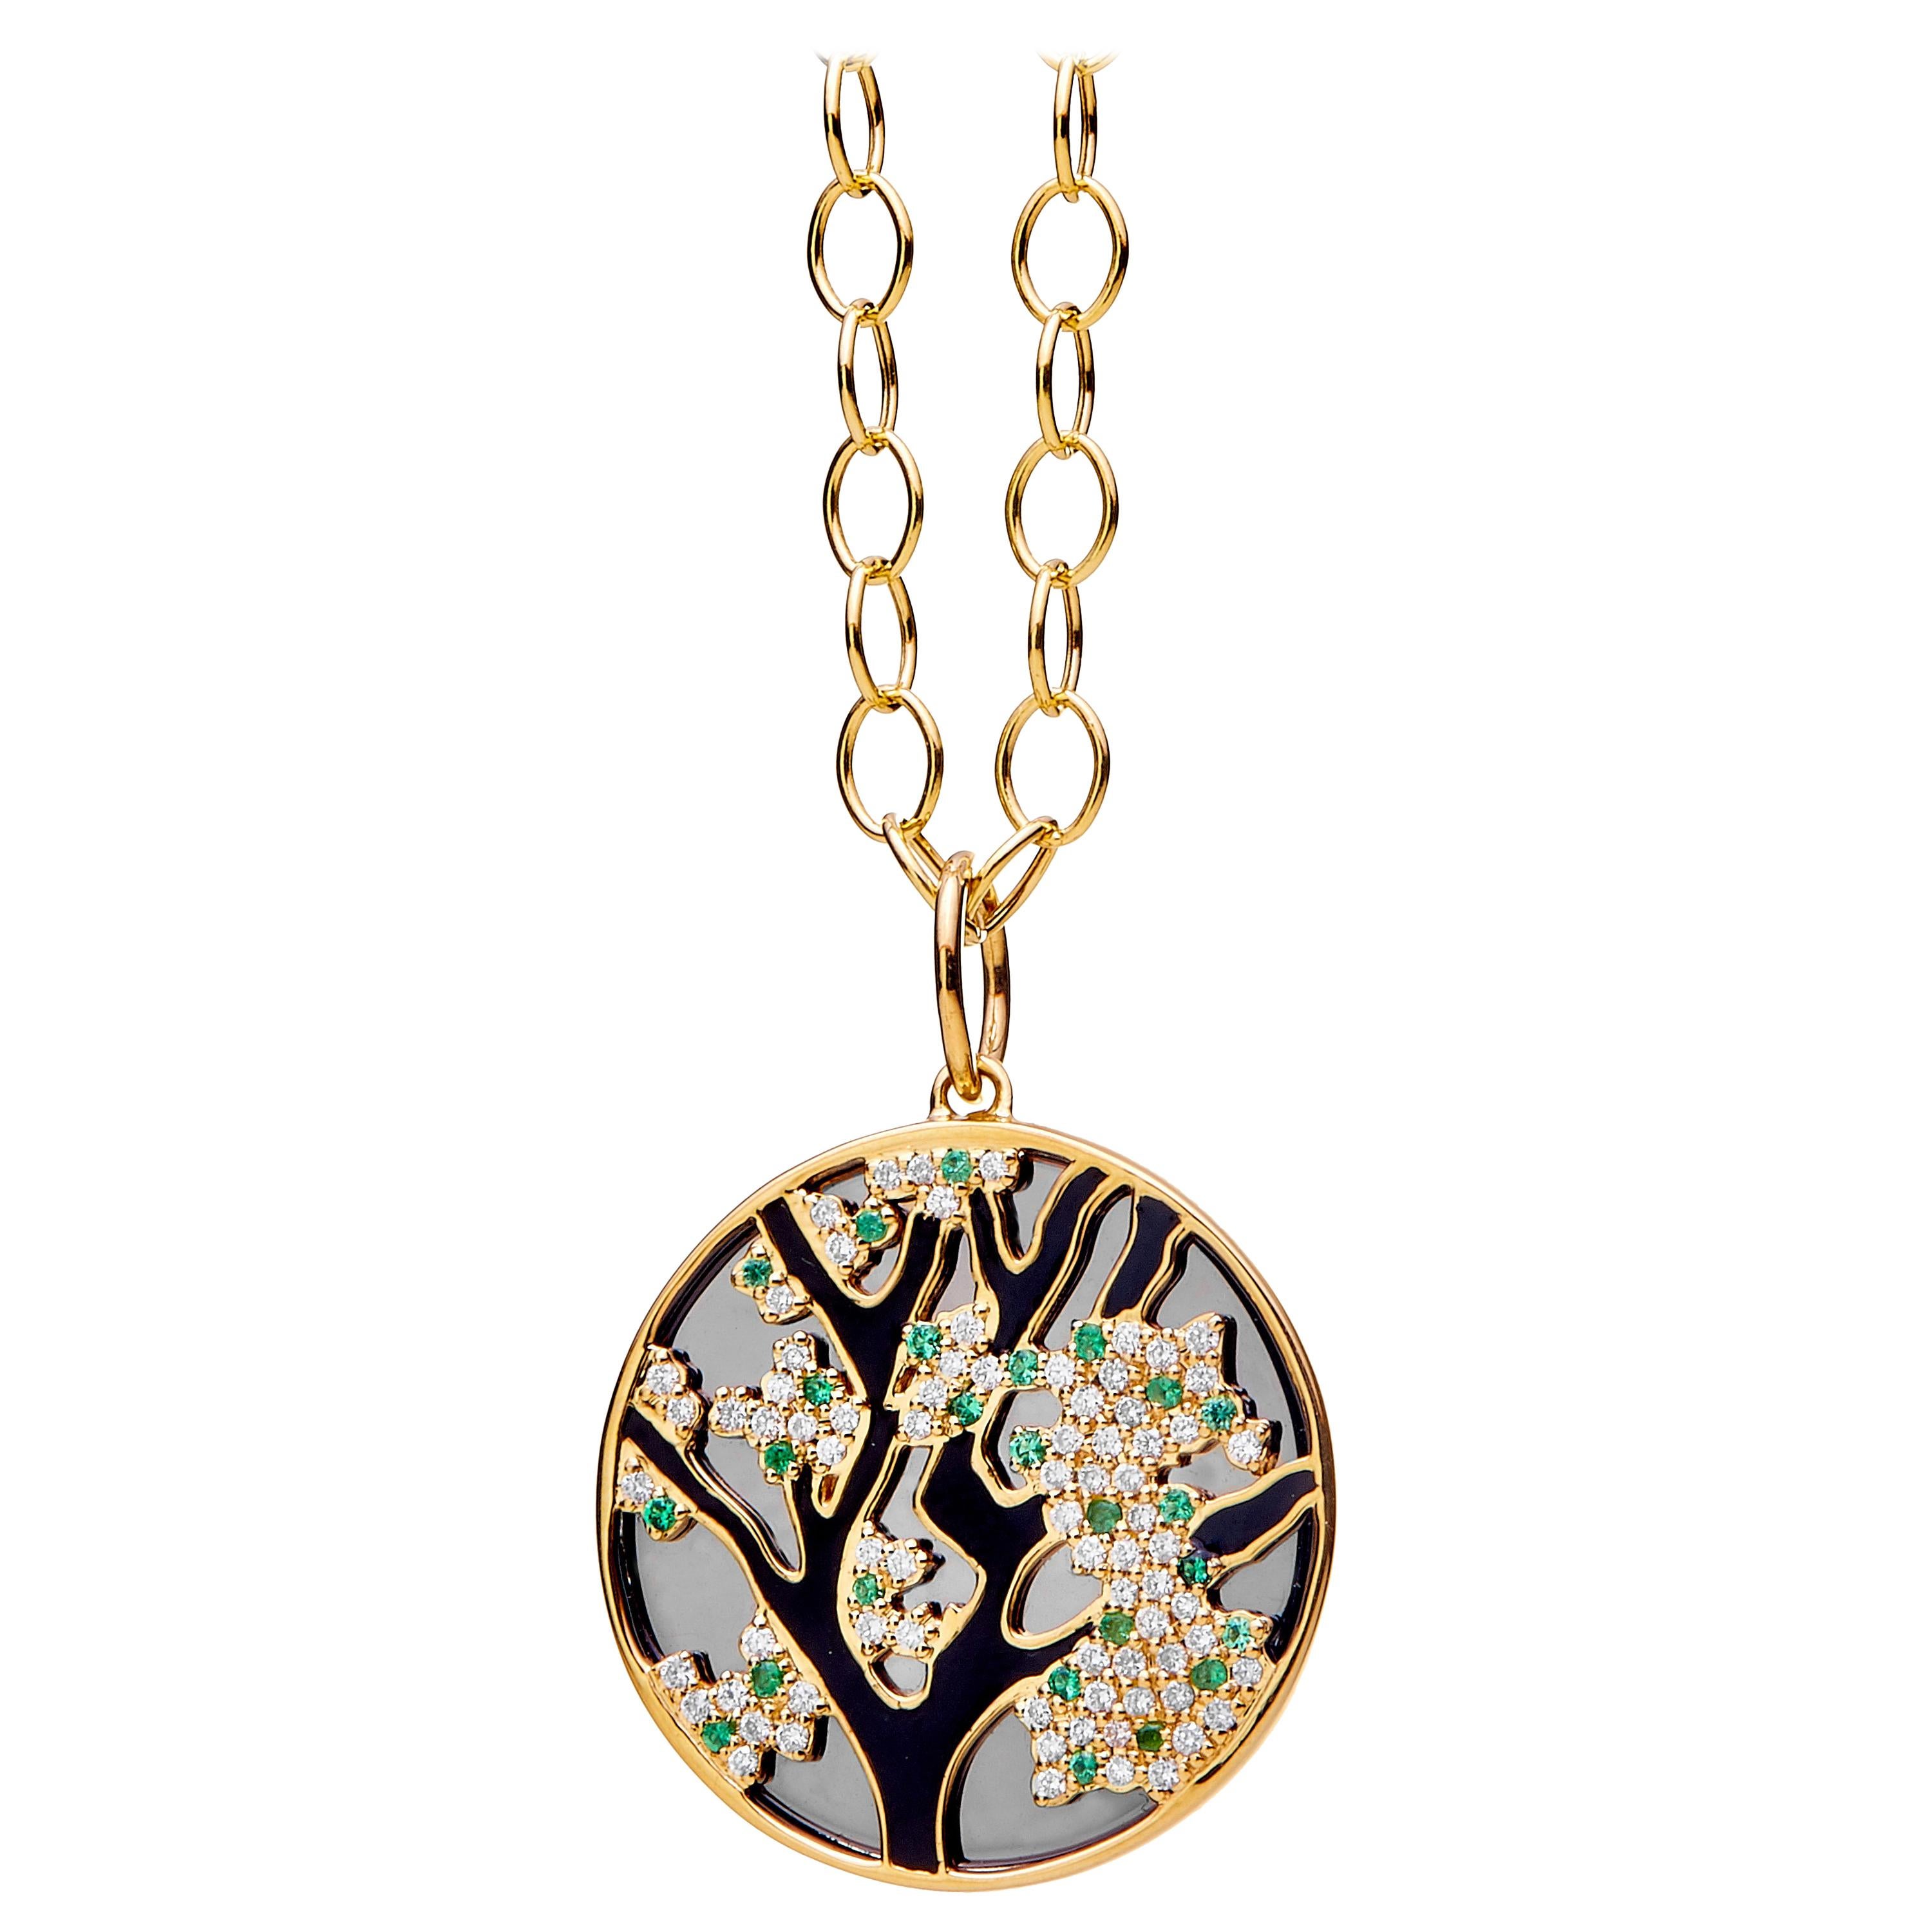 Syna Yellow Gold Pendant with Emeralds, Black Enamel and Diamonds